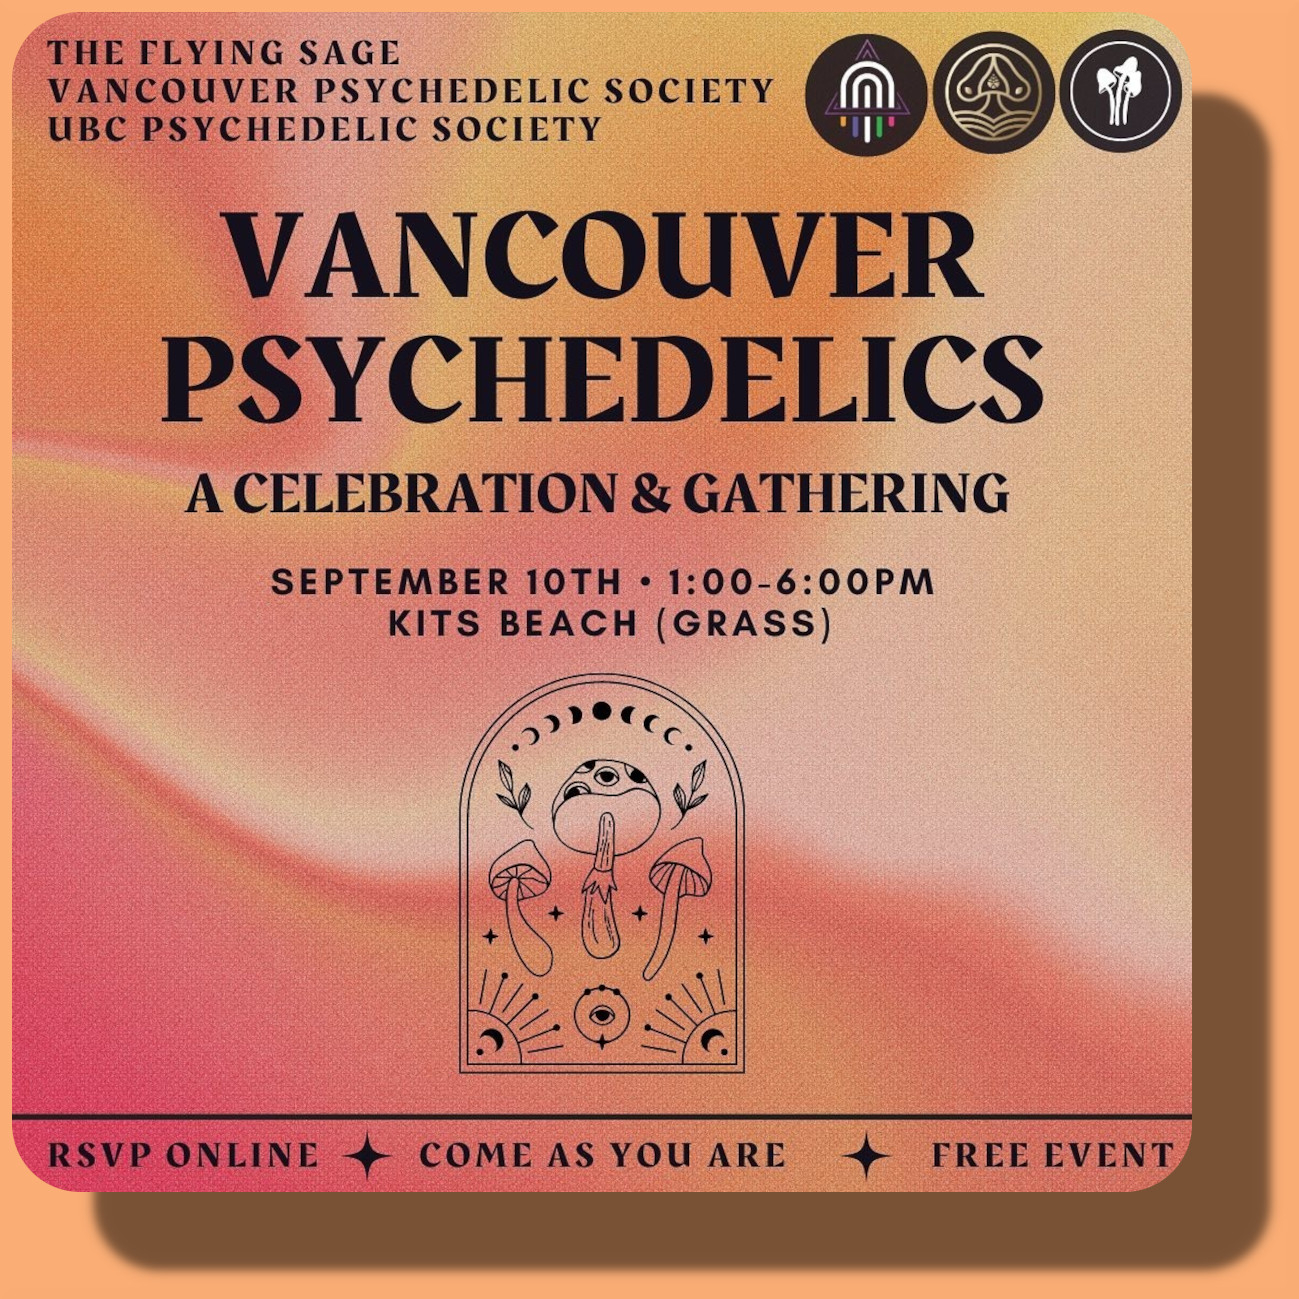 Vancouver Psychedelics: September 10th, Kits Beach